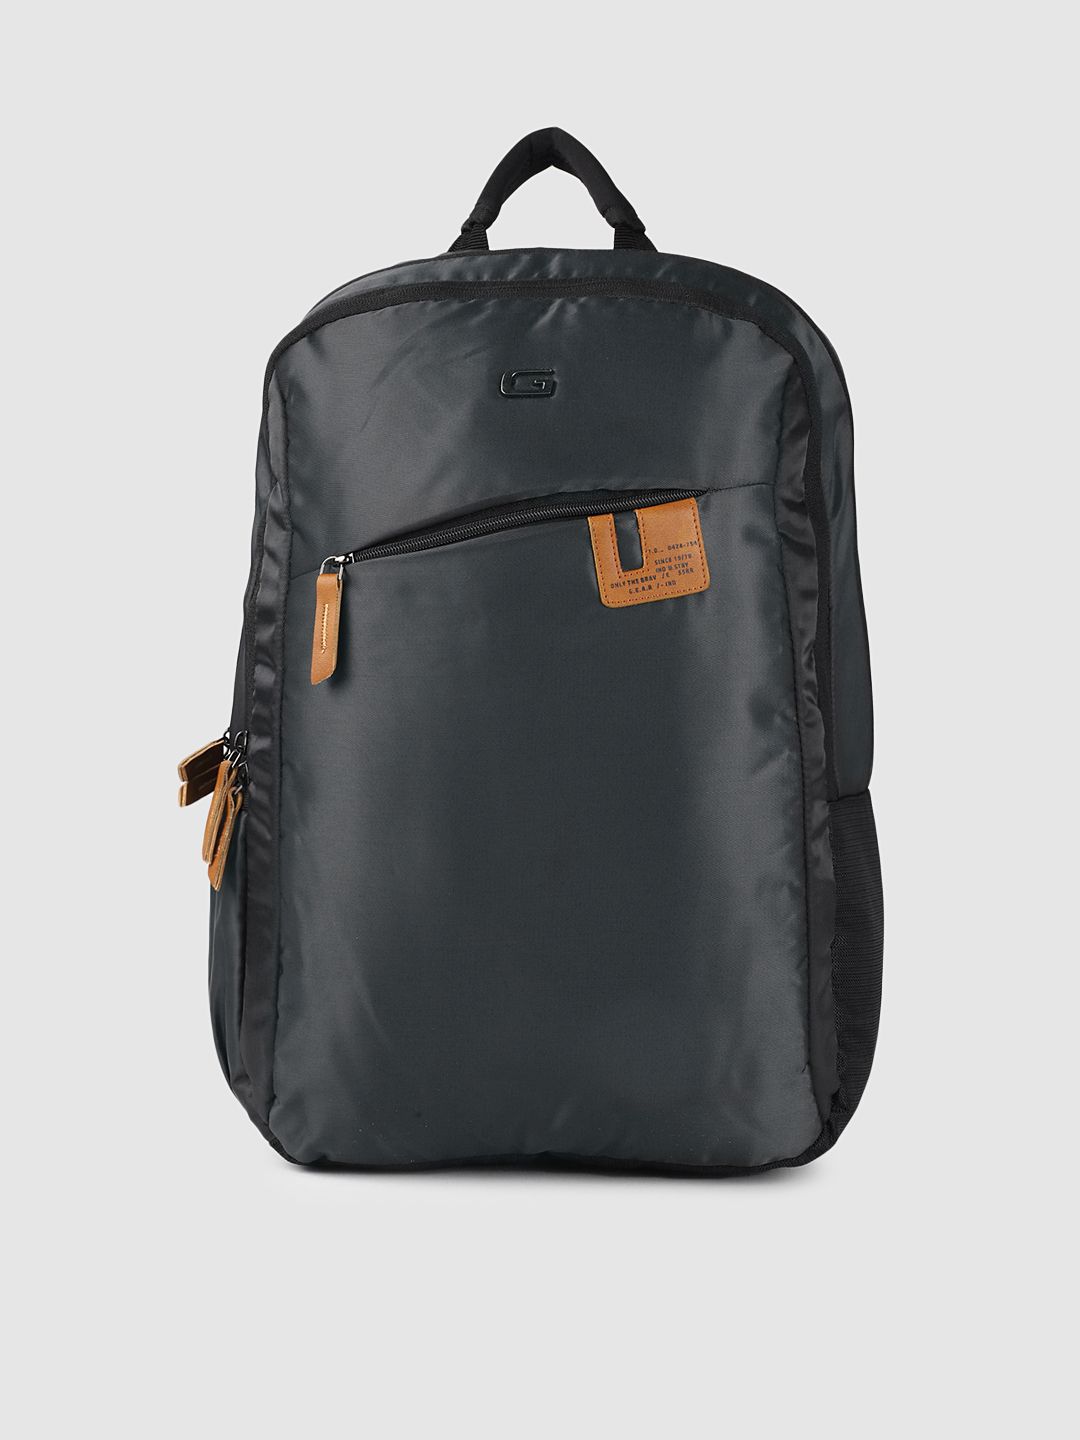 Gear Unisex Charcoal Grey Solid COMPACT BUSINESS LAPTOP Backpack Price in India